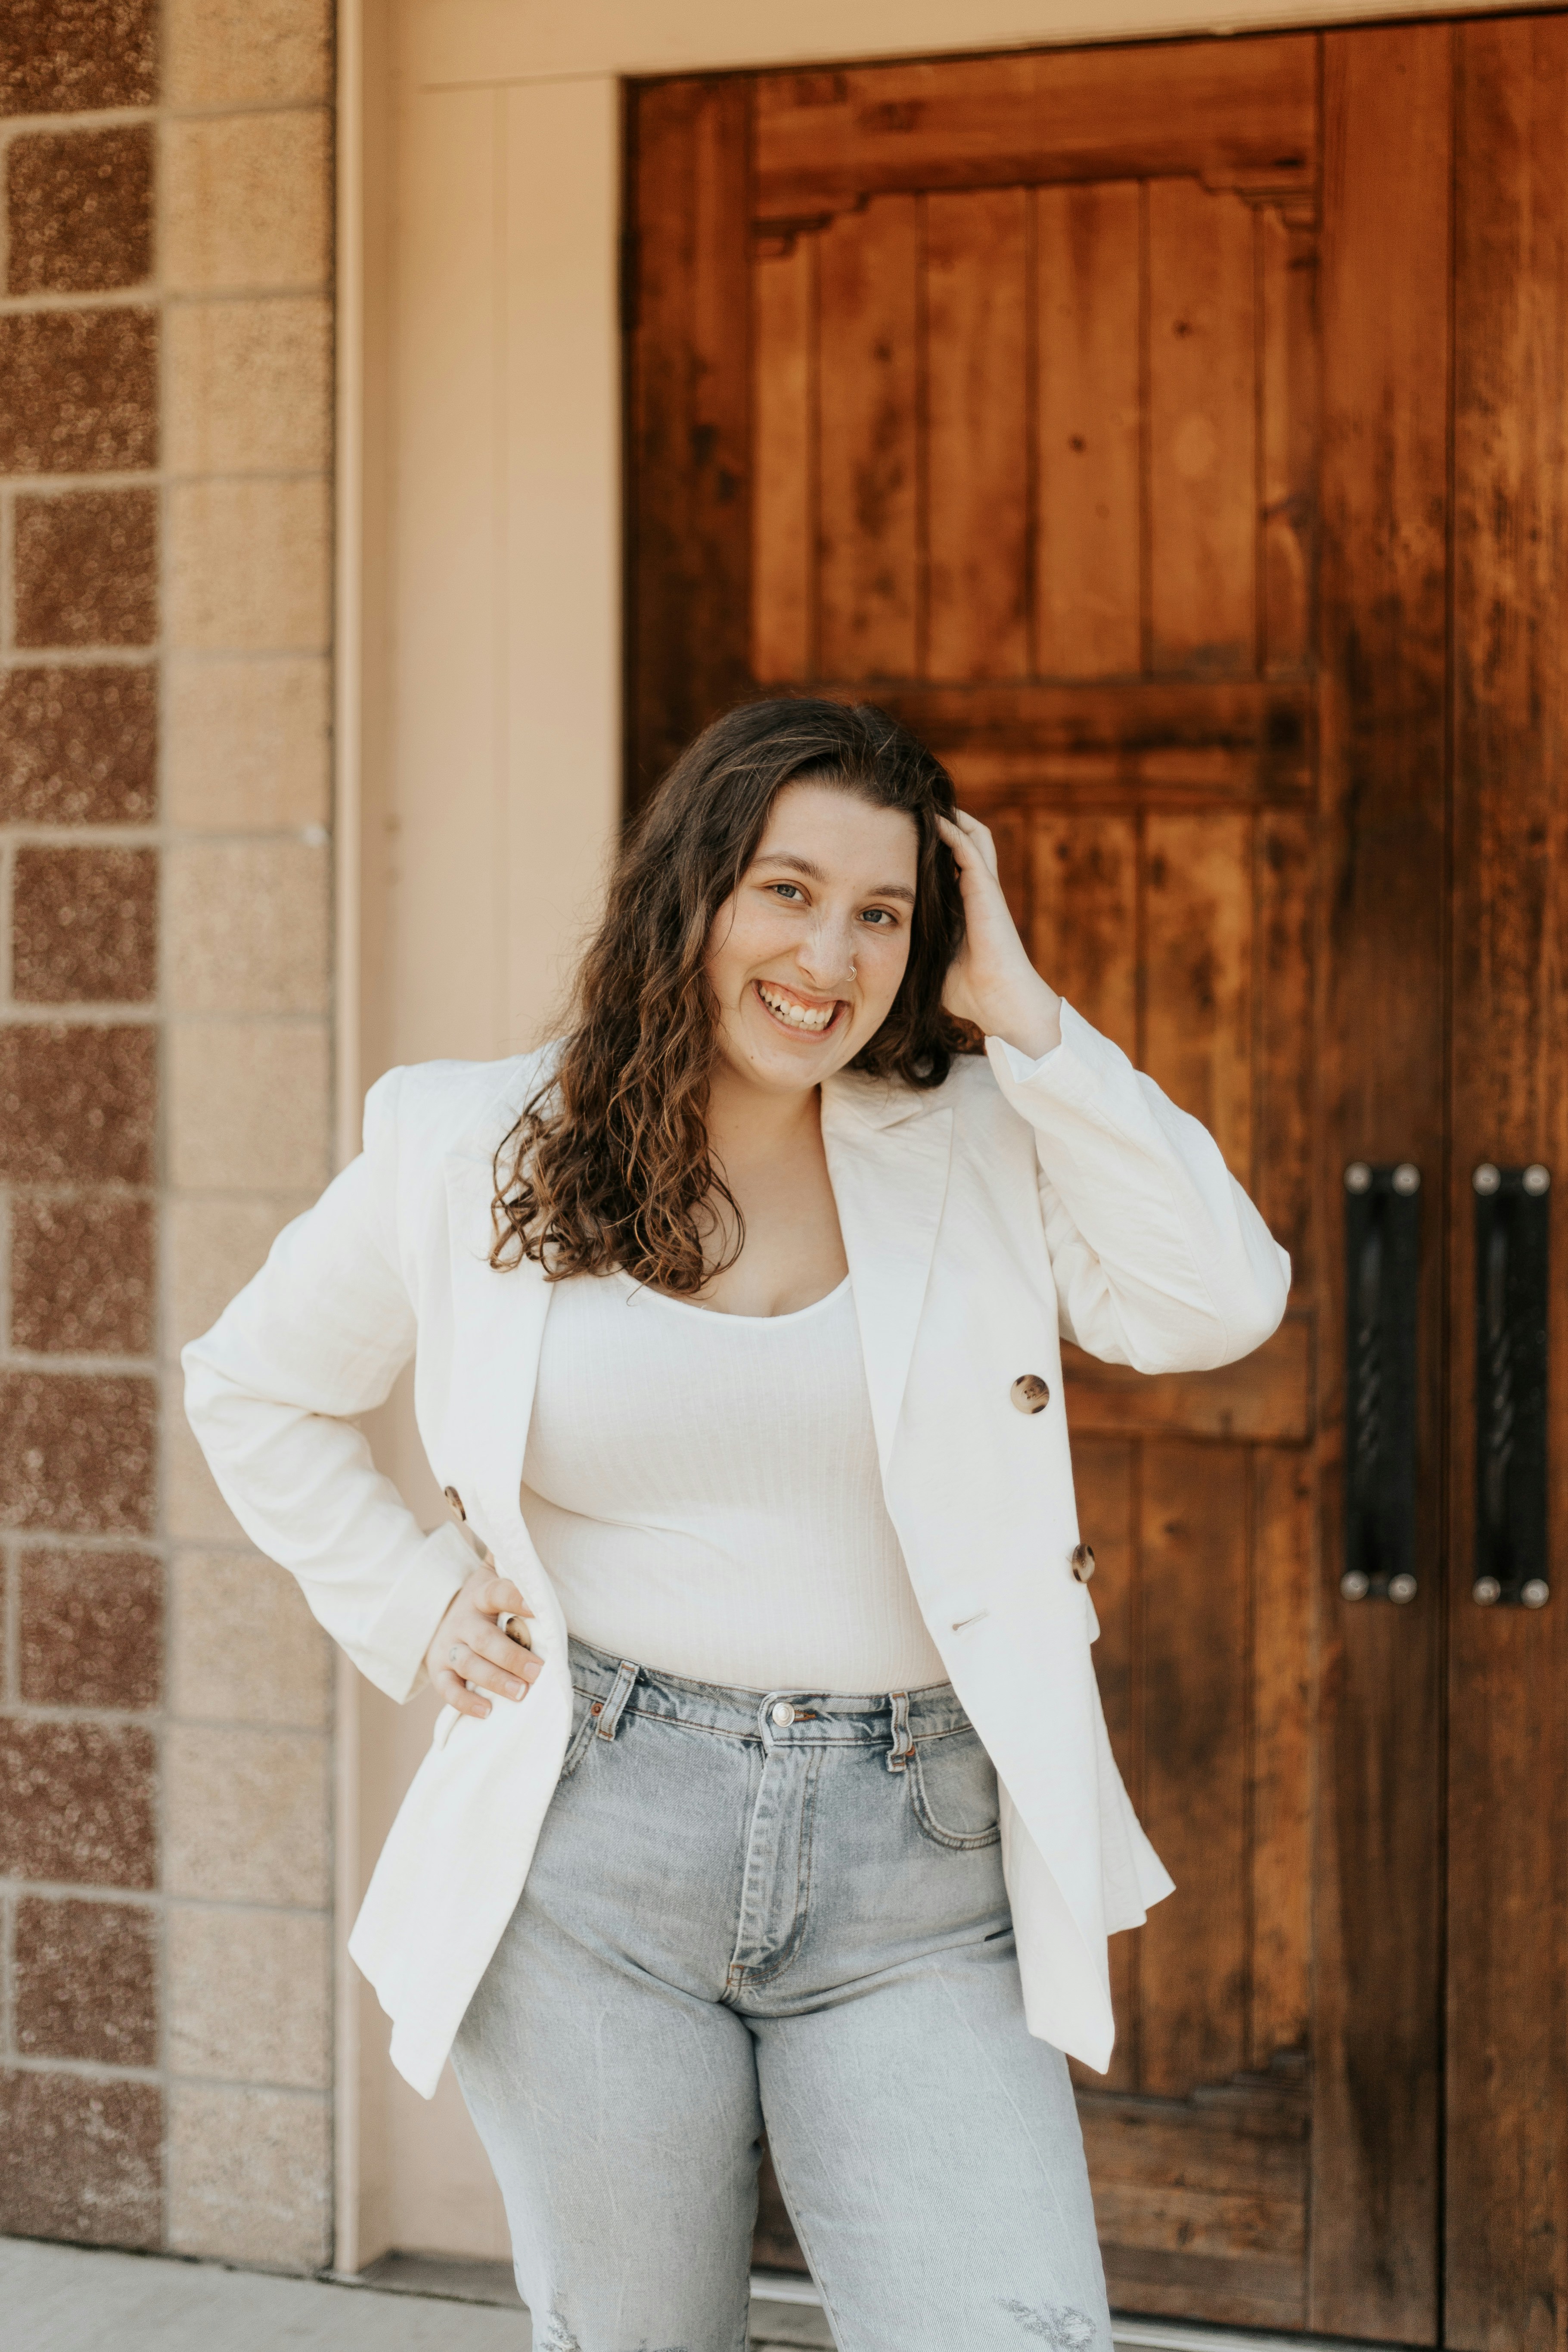 Best 500+ Plus Size Model Pictures HD Download Free Images and Stock Photos on Unsplash image